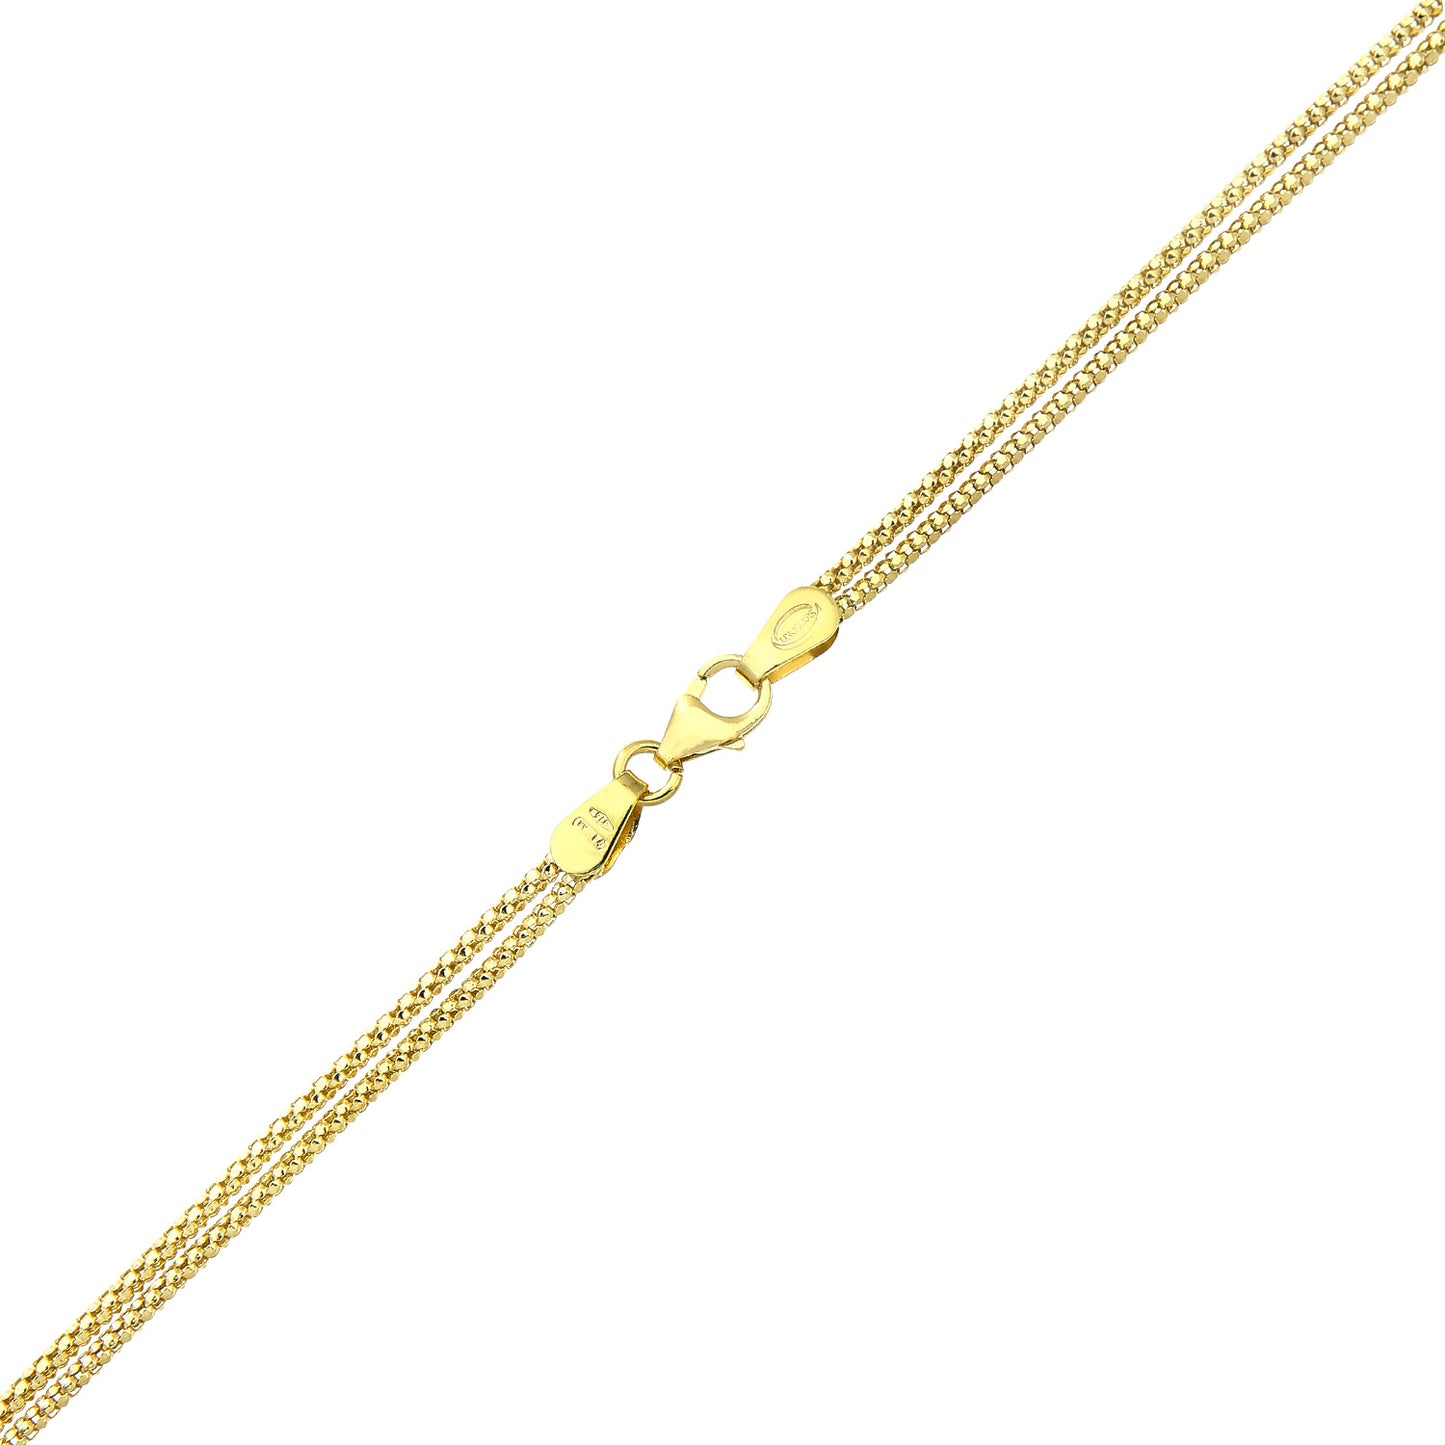 9ct Gold  Popcorn Negligee Necklace 18 inch - HHHAXL42